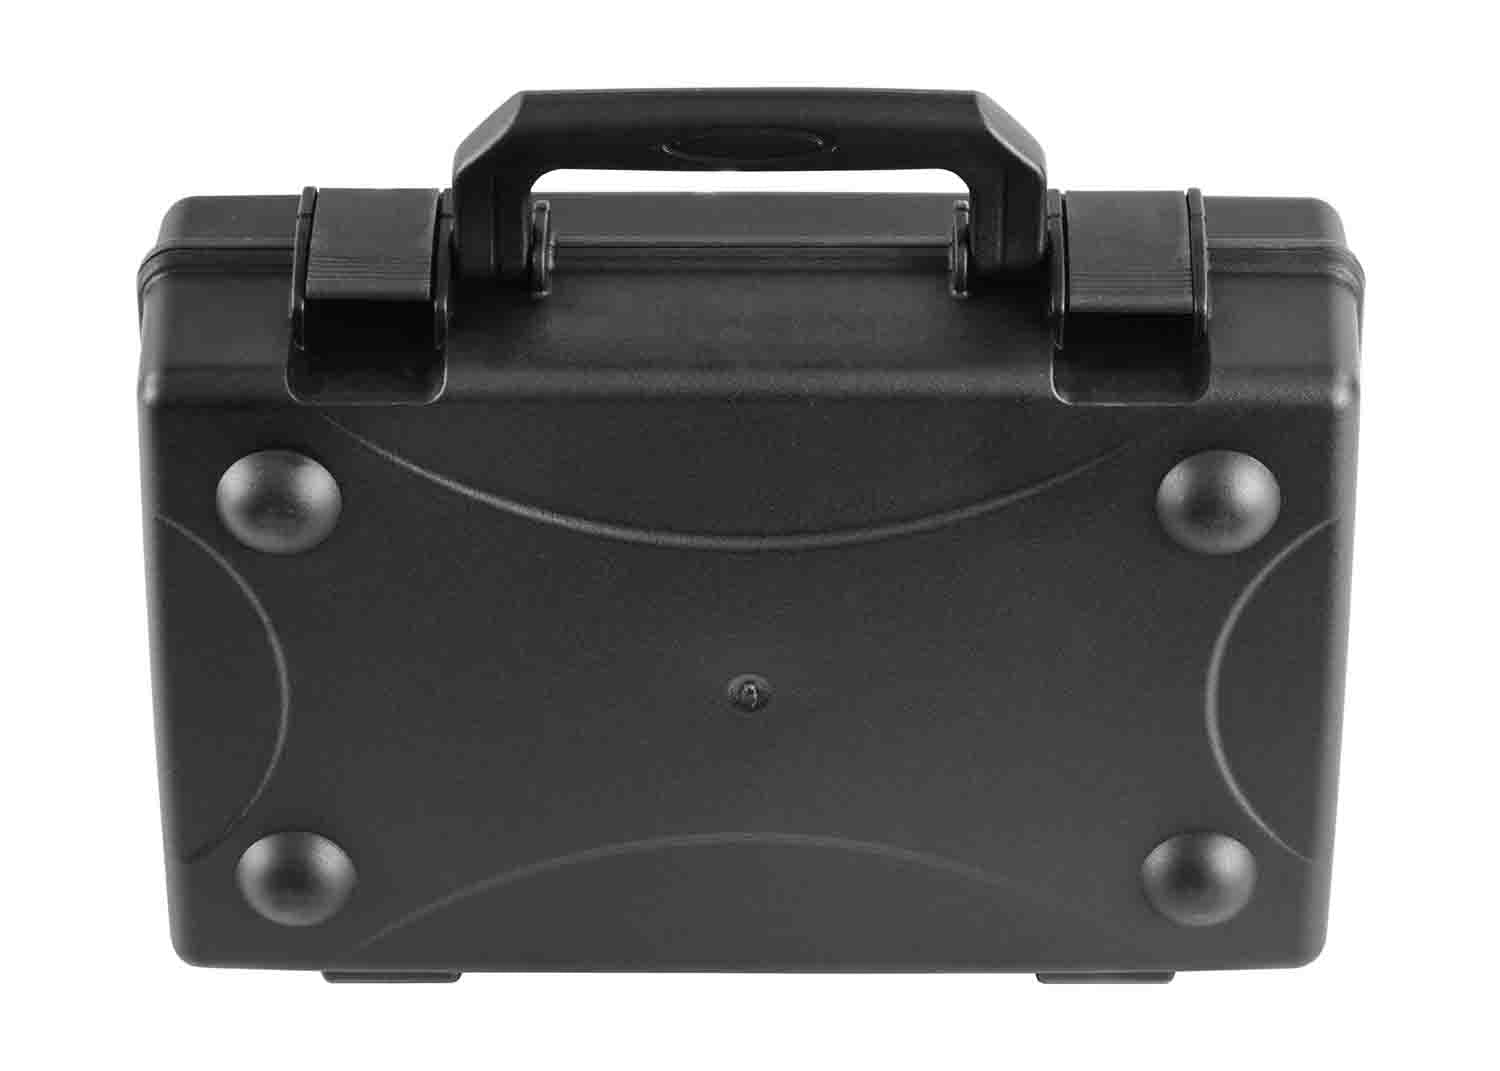 Odyssey VU120703NF Vulcan Injection-Molded Utility Case - 13 x 8 x 2.25" Interior - Hollywood DJ